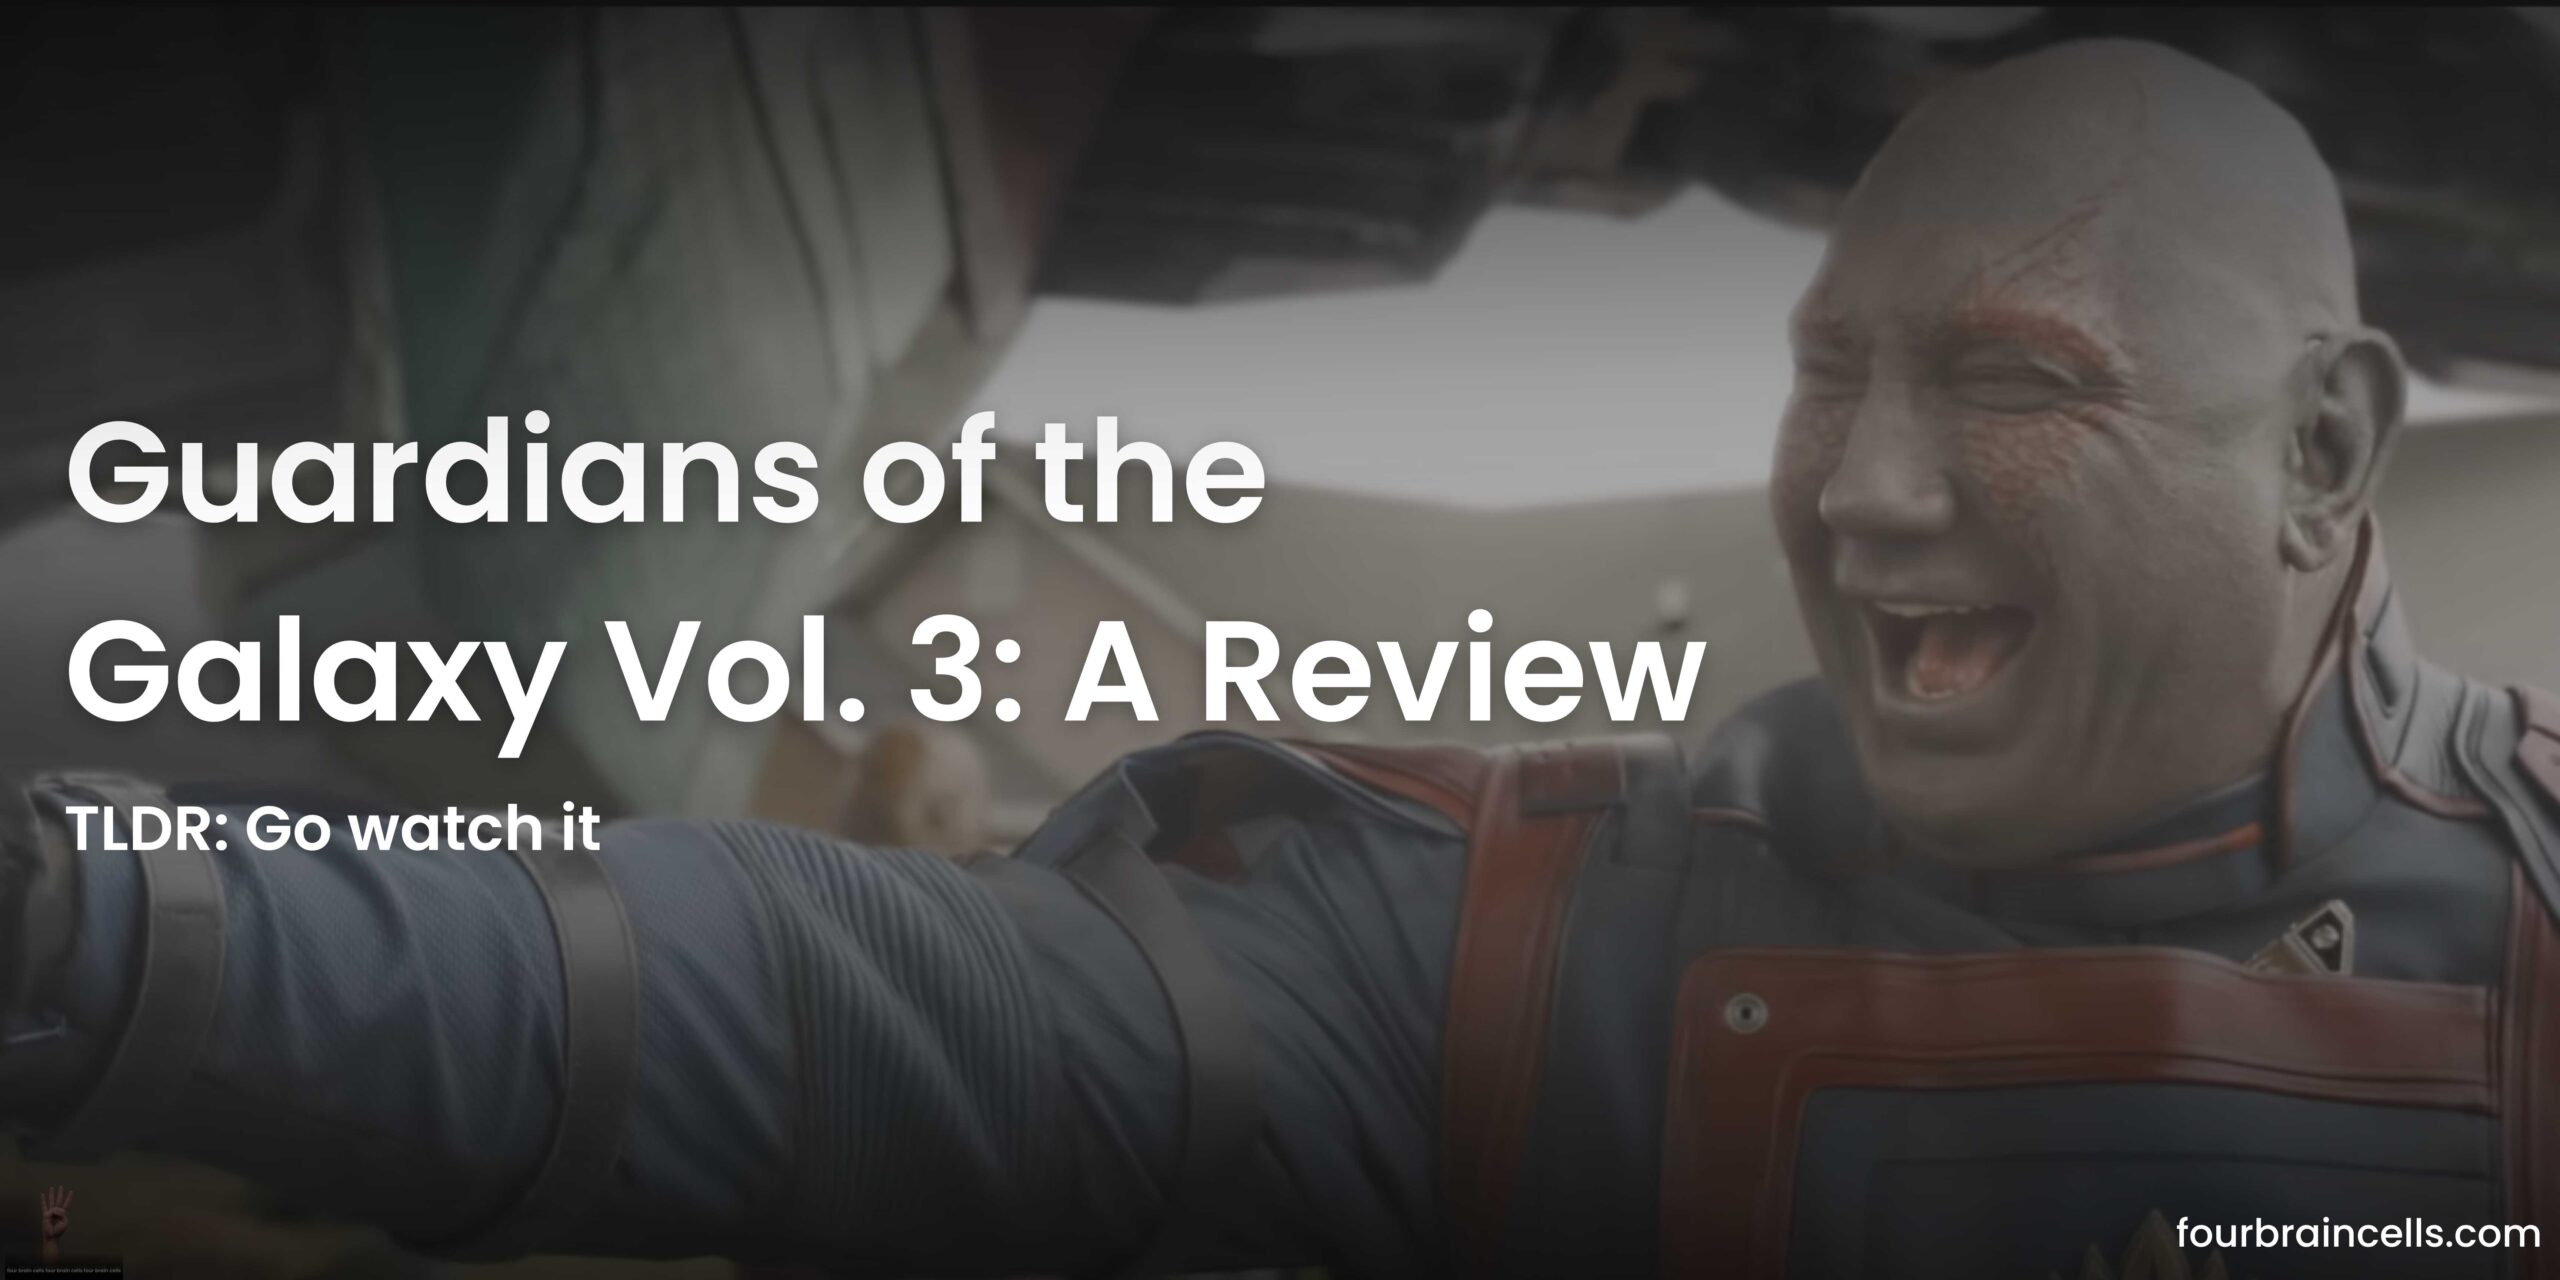 guardians of the galaxy vol.3 review